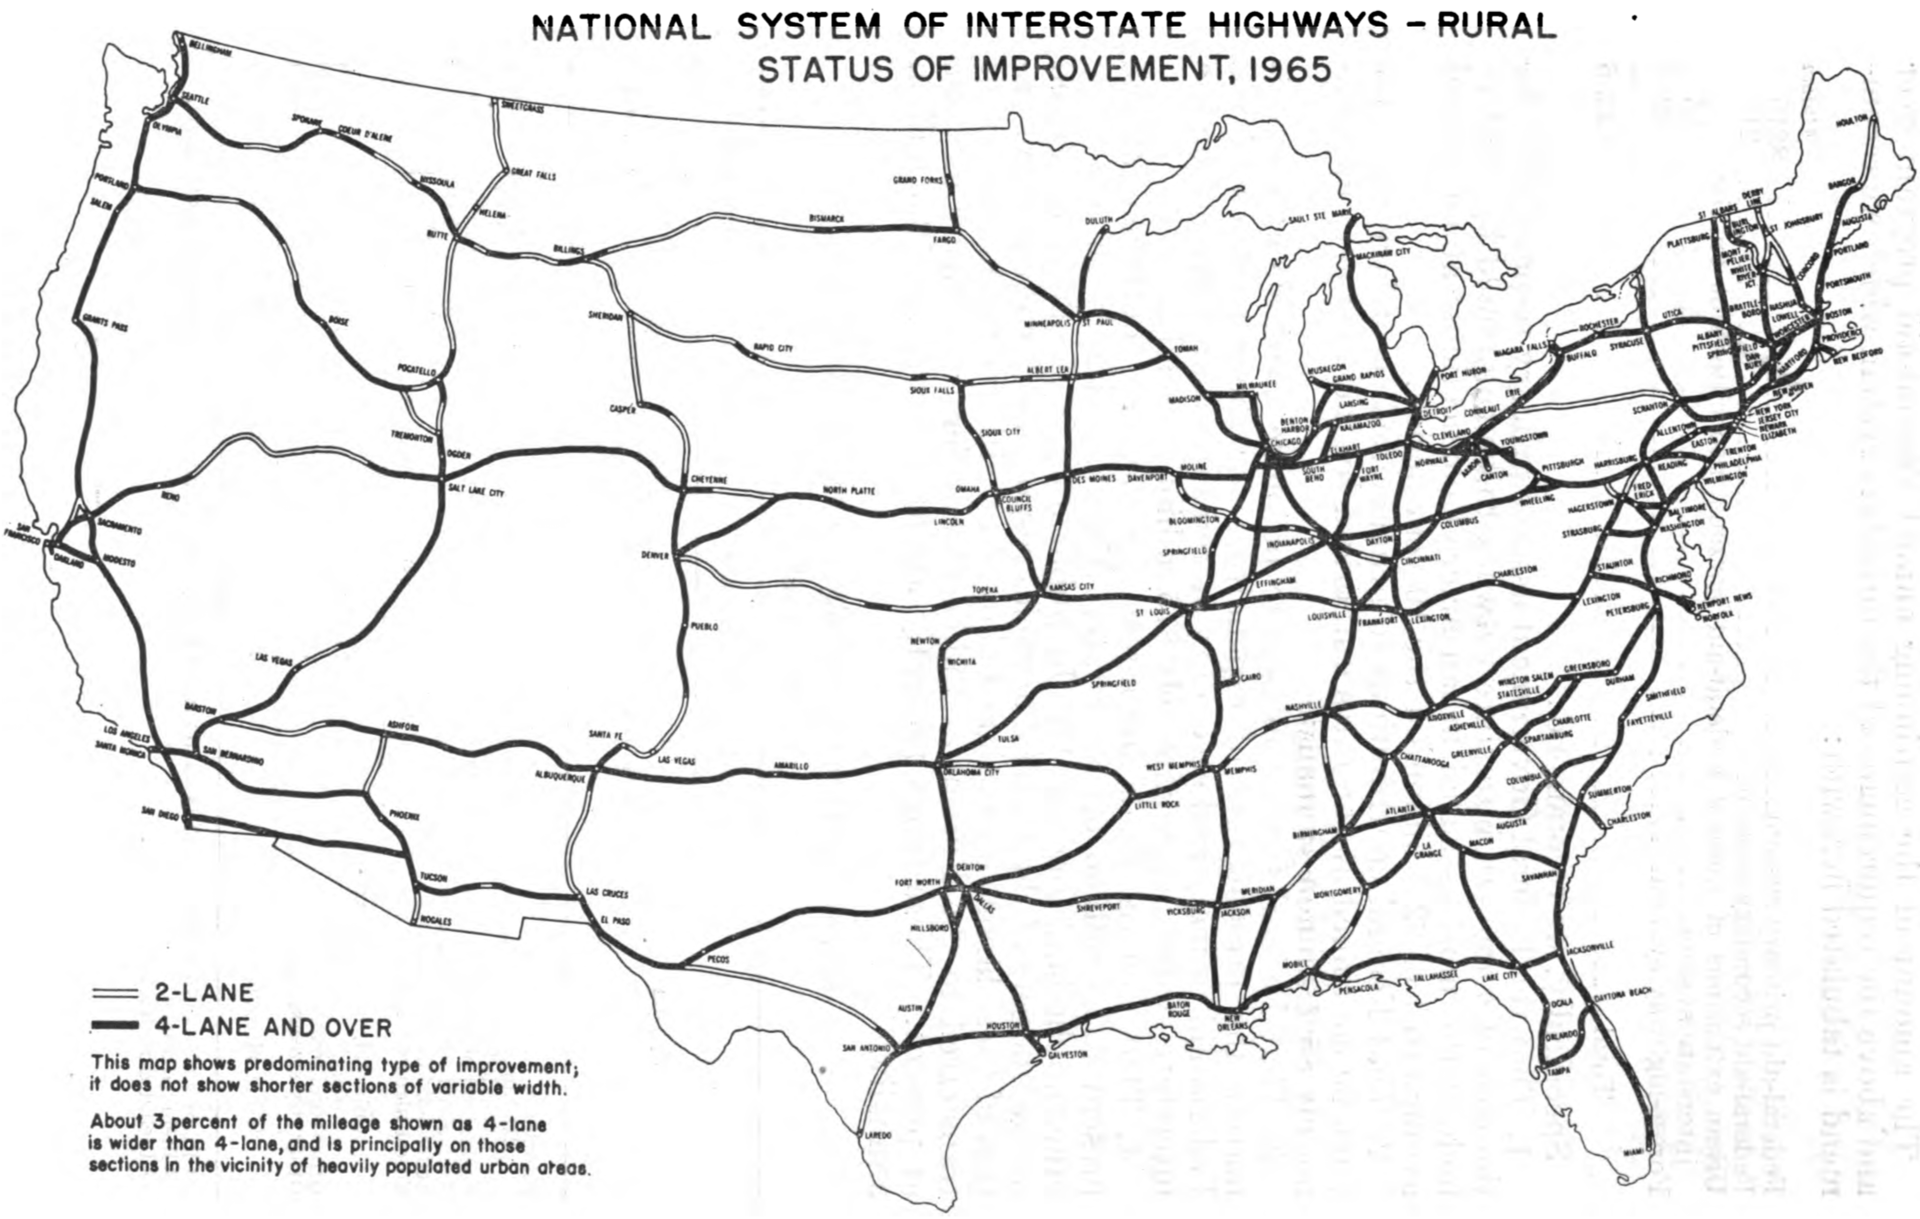 National Highway Program   National System of Interstate Highways   Rural Status of Improvement 1965 Heres How Interstates Are Numbered And The Logic Behind It